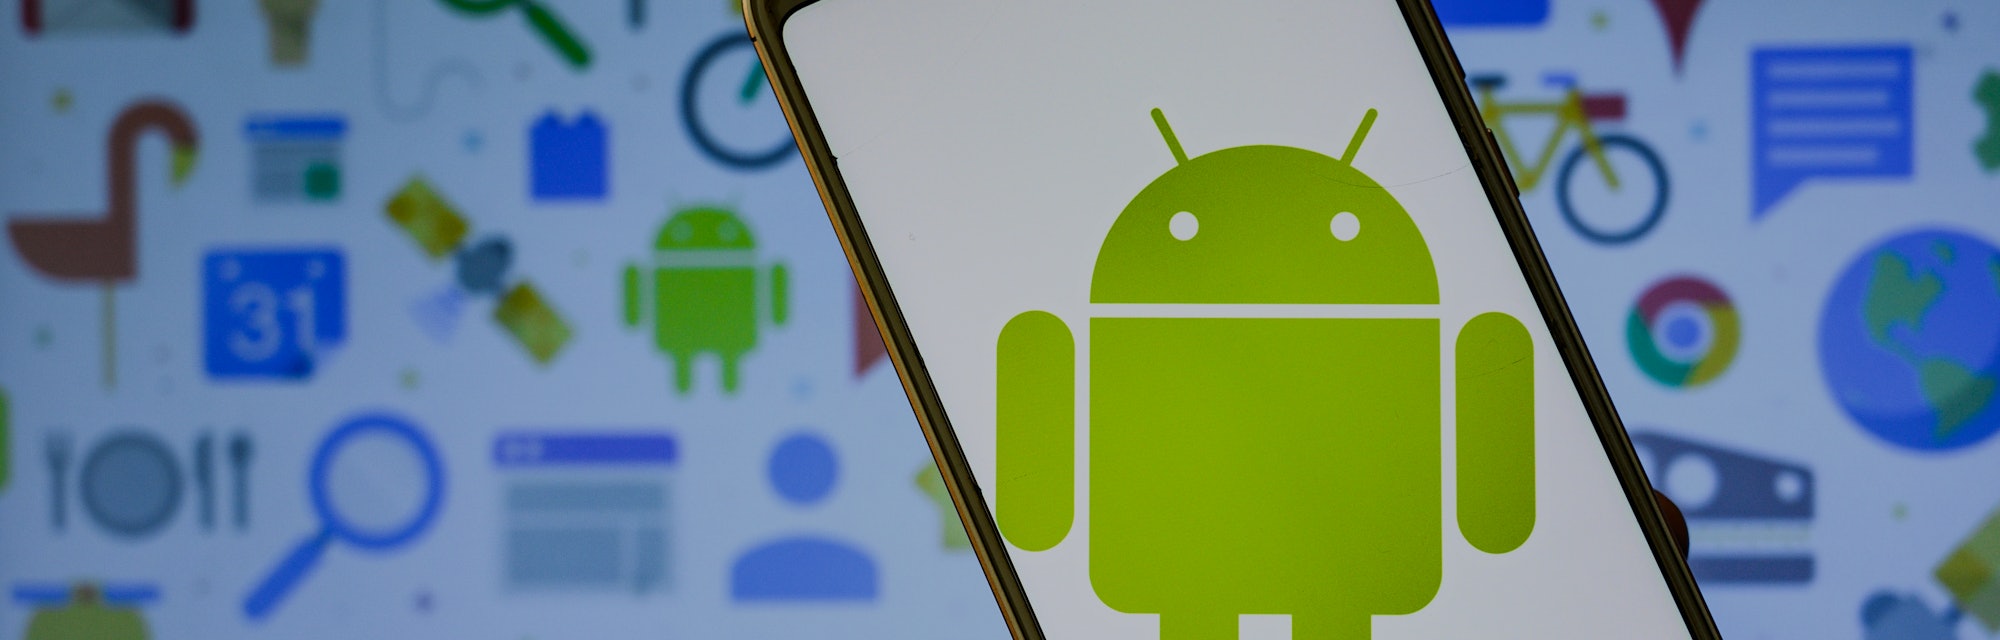 Android logo is seen displayed on a phone screen in this illustration photo taken in Tehatta, West B...